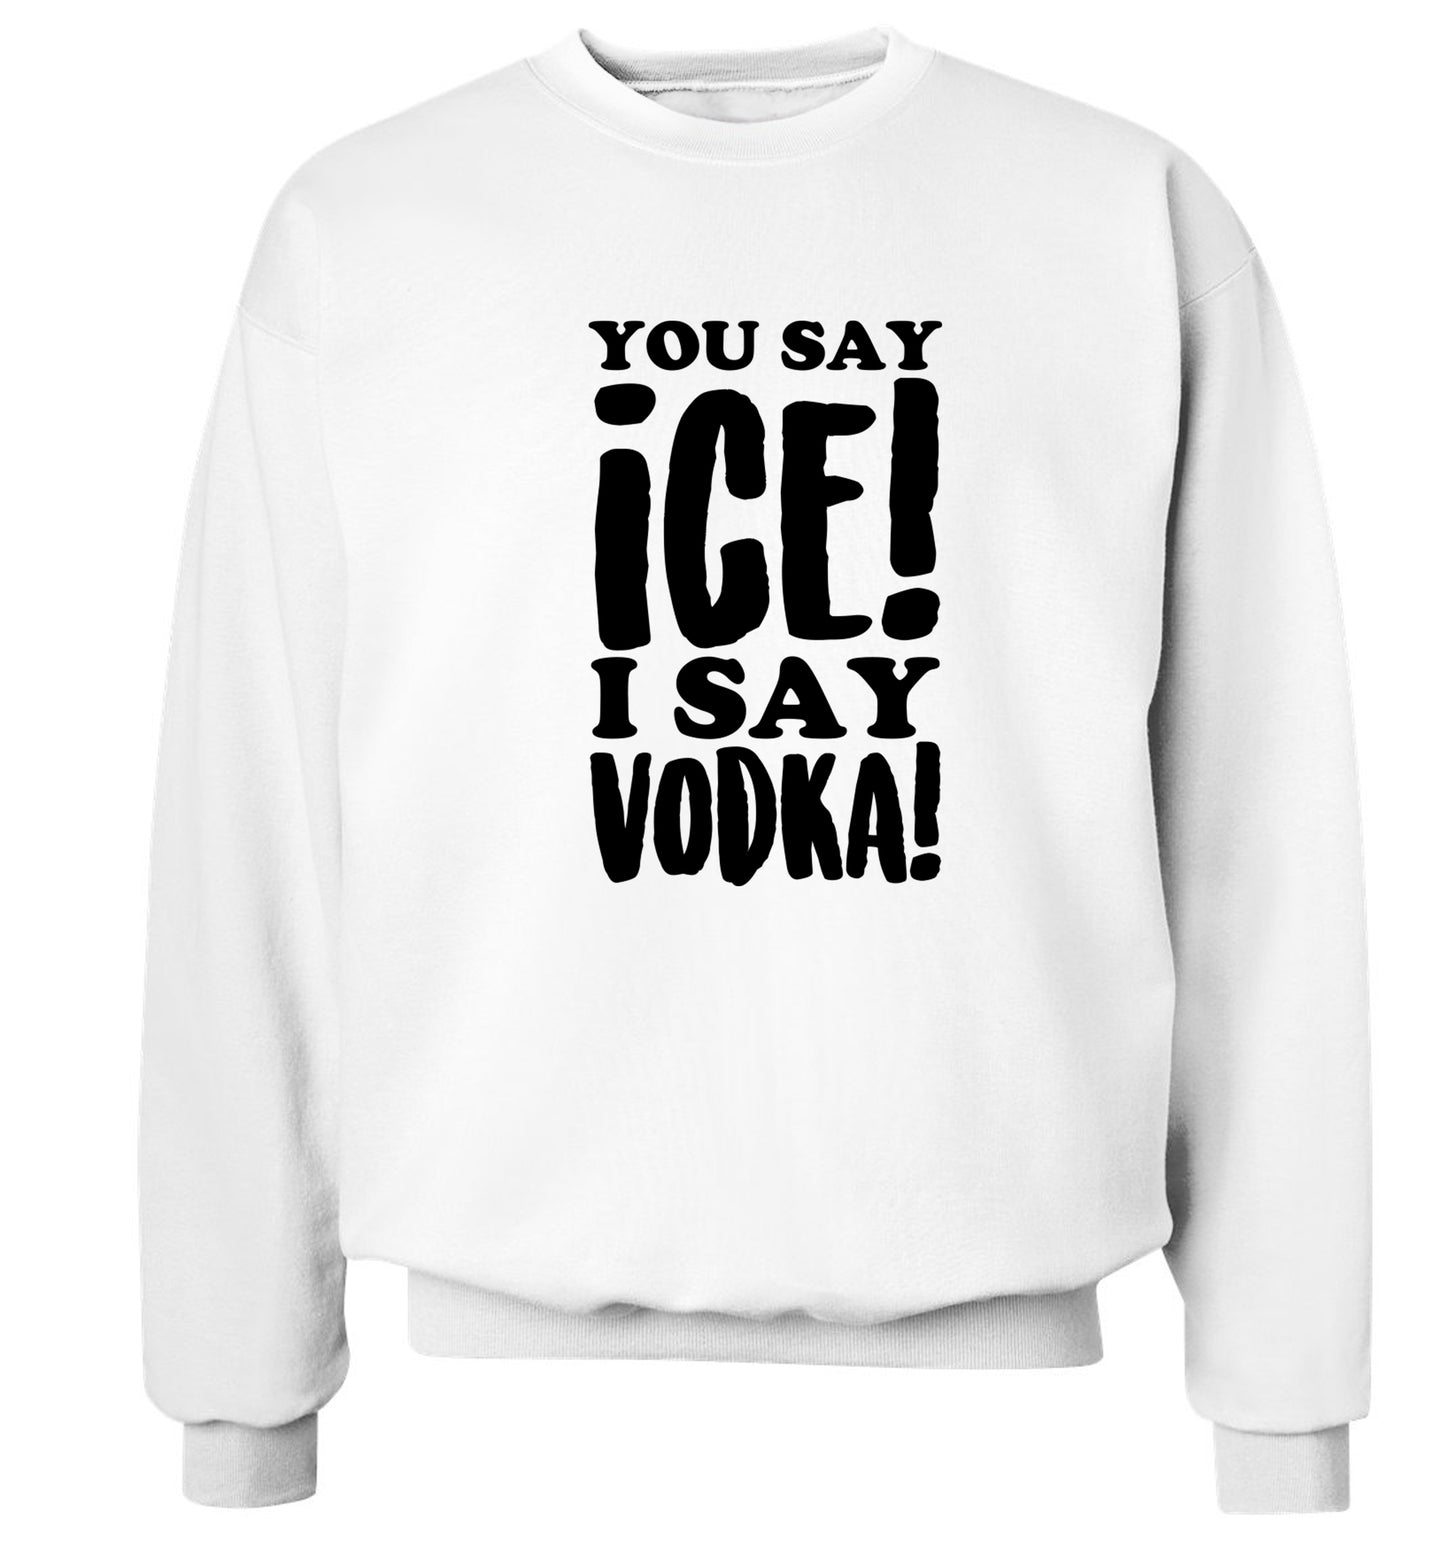 You say ice I say vodka! Adult's unisex white Sweater 2XL